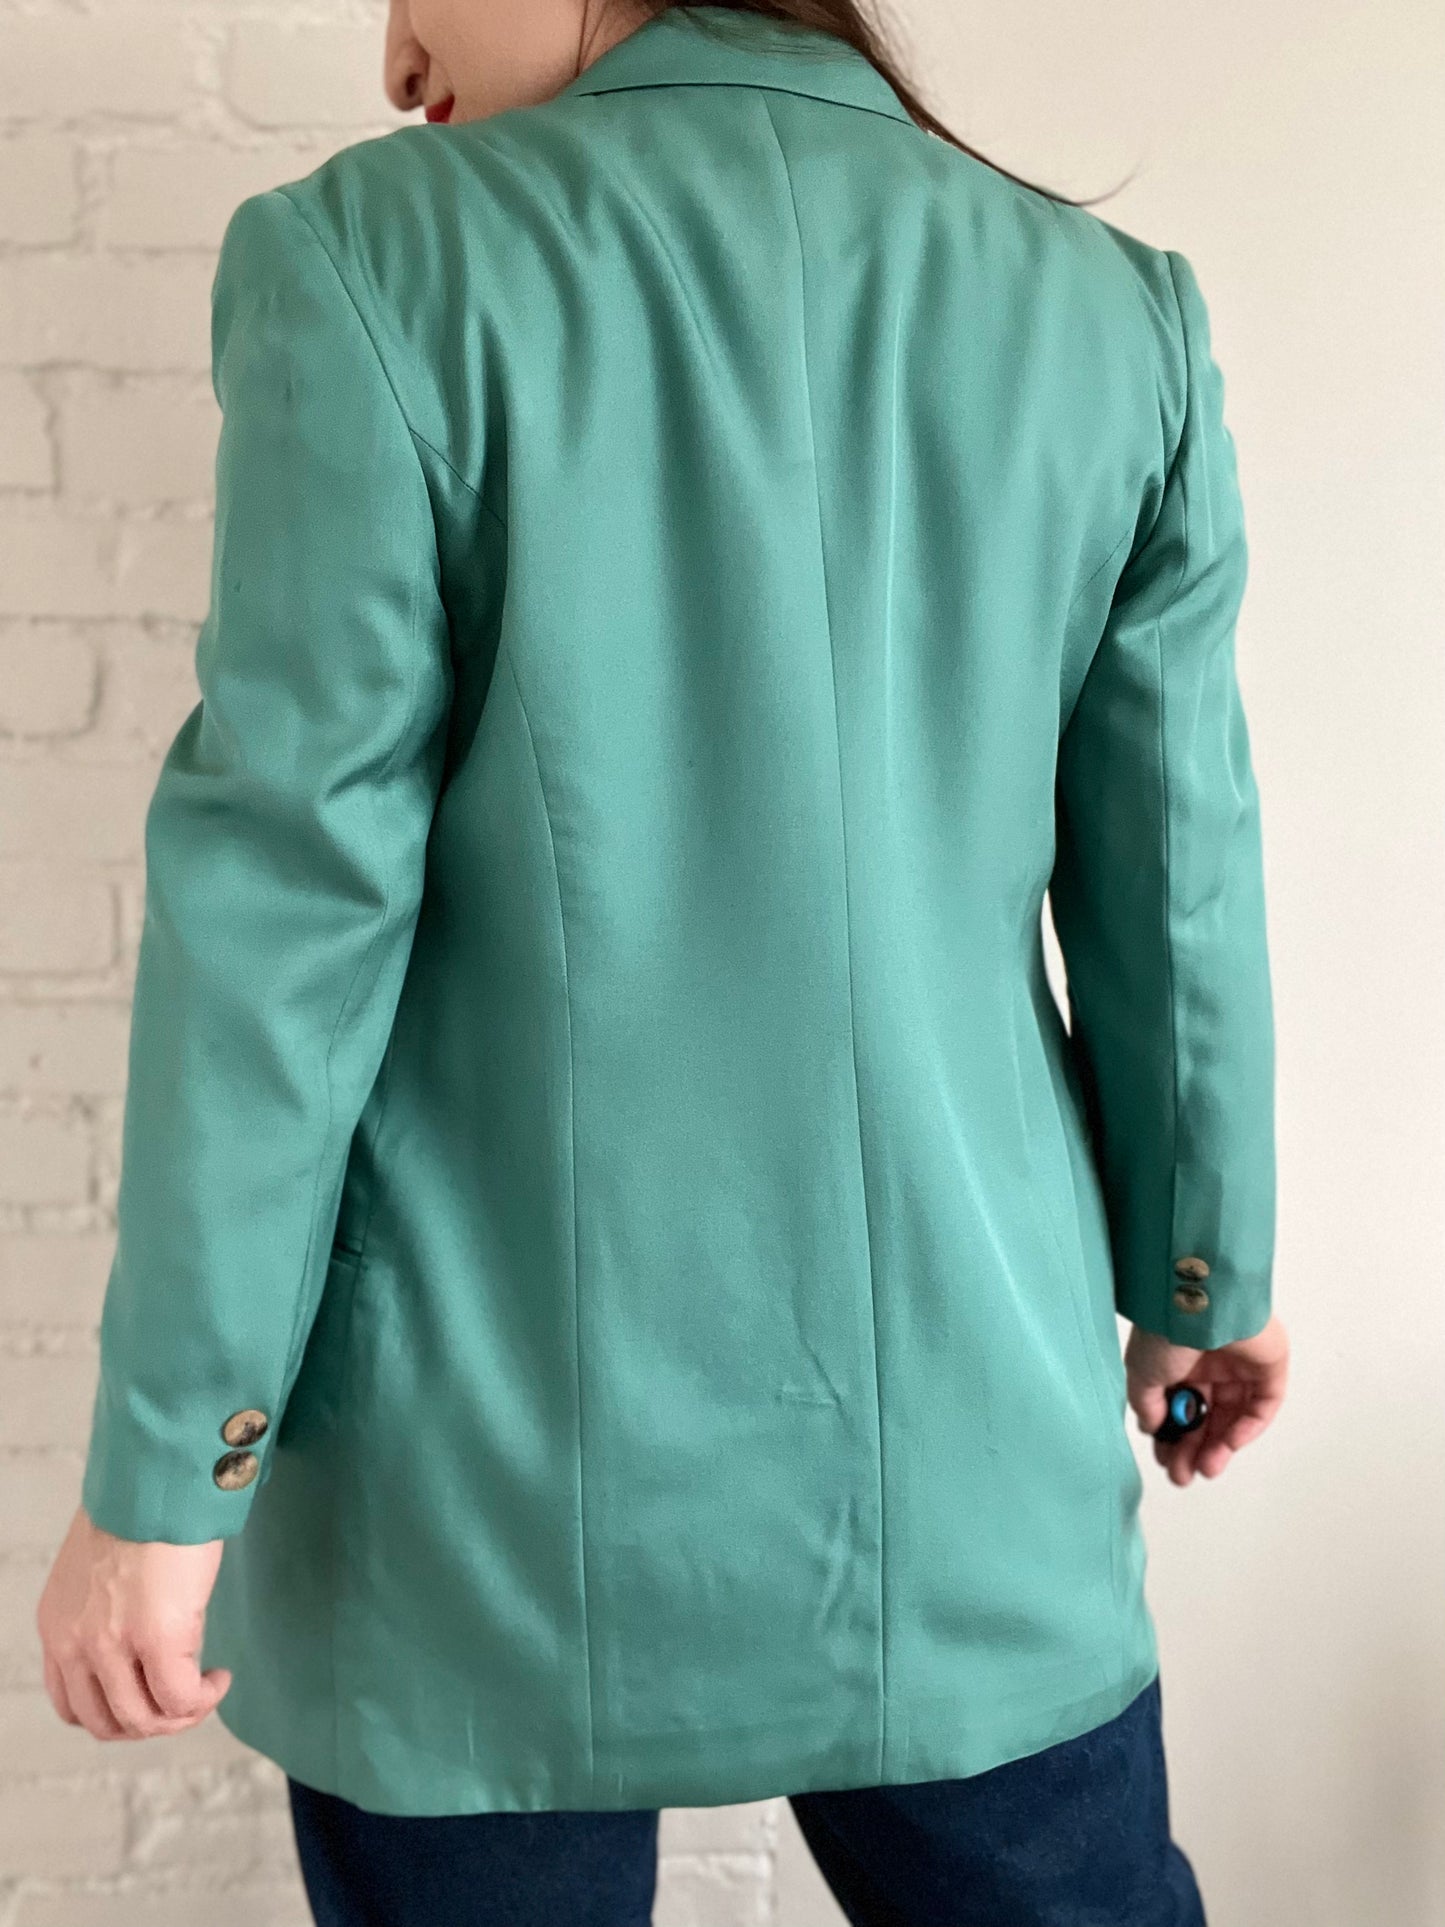 Turquoise Double-Breasted Silk Satin Blazer  - L